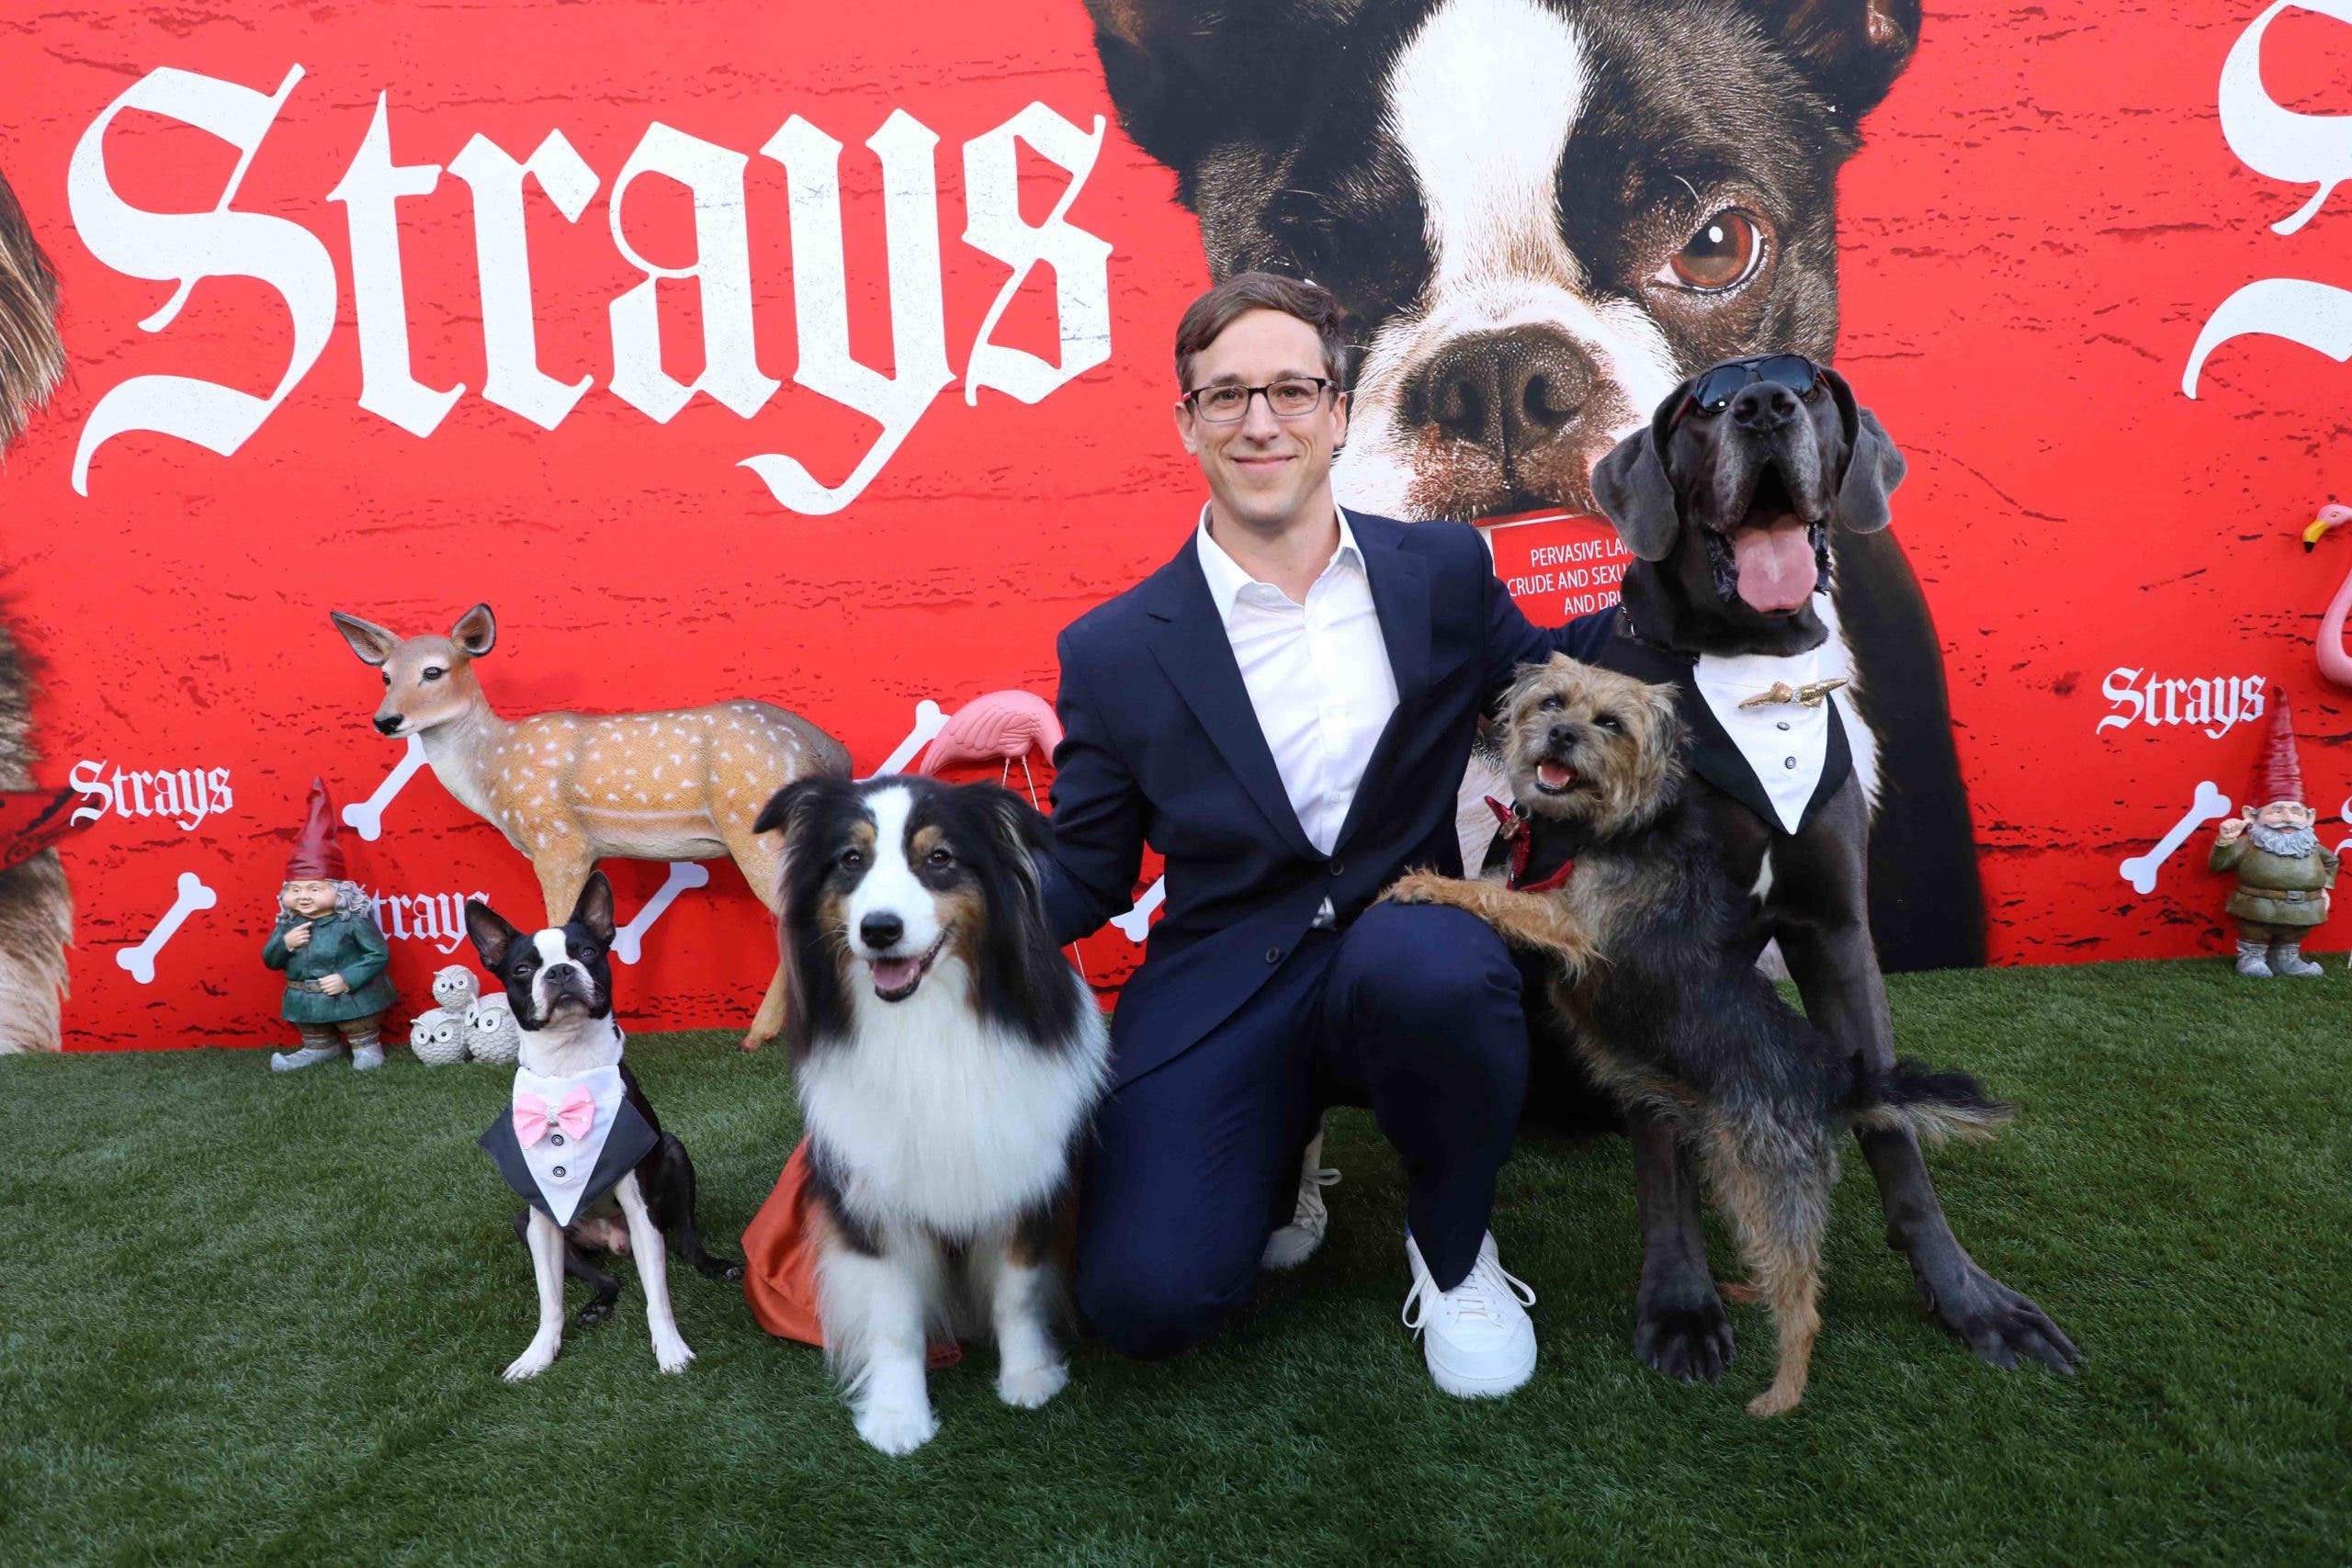 Not-For-Kids ‘Strays’ Dog Movie Subverts Genre with a
Powerehouse Comedic Voice Cast